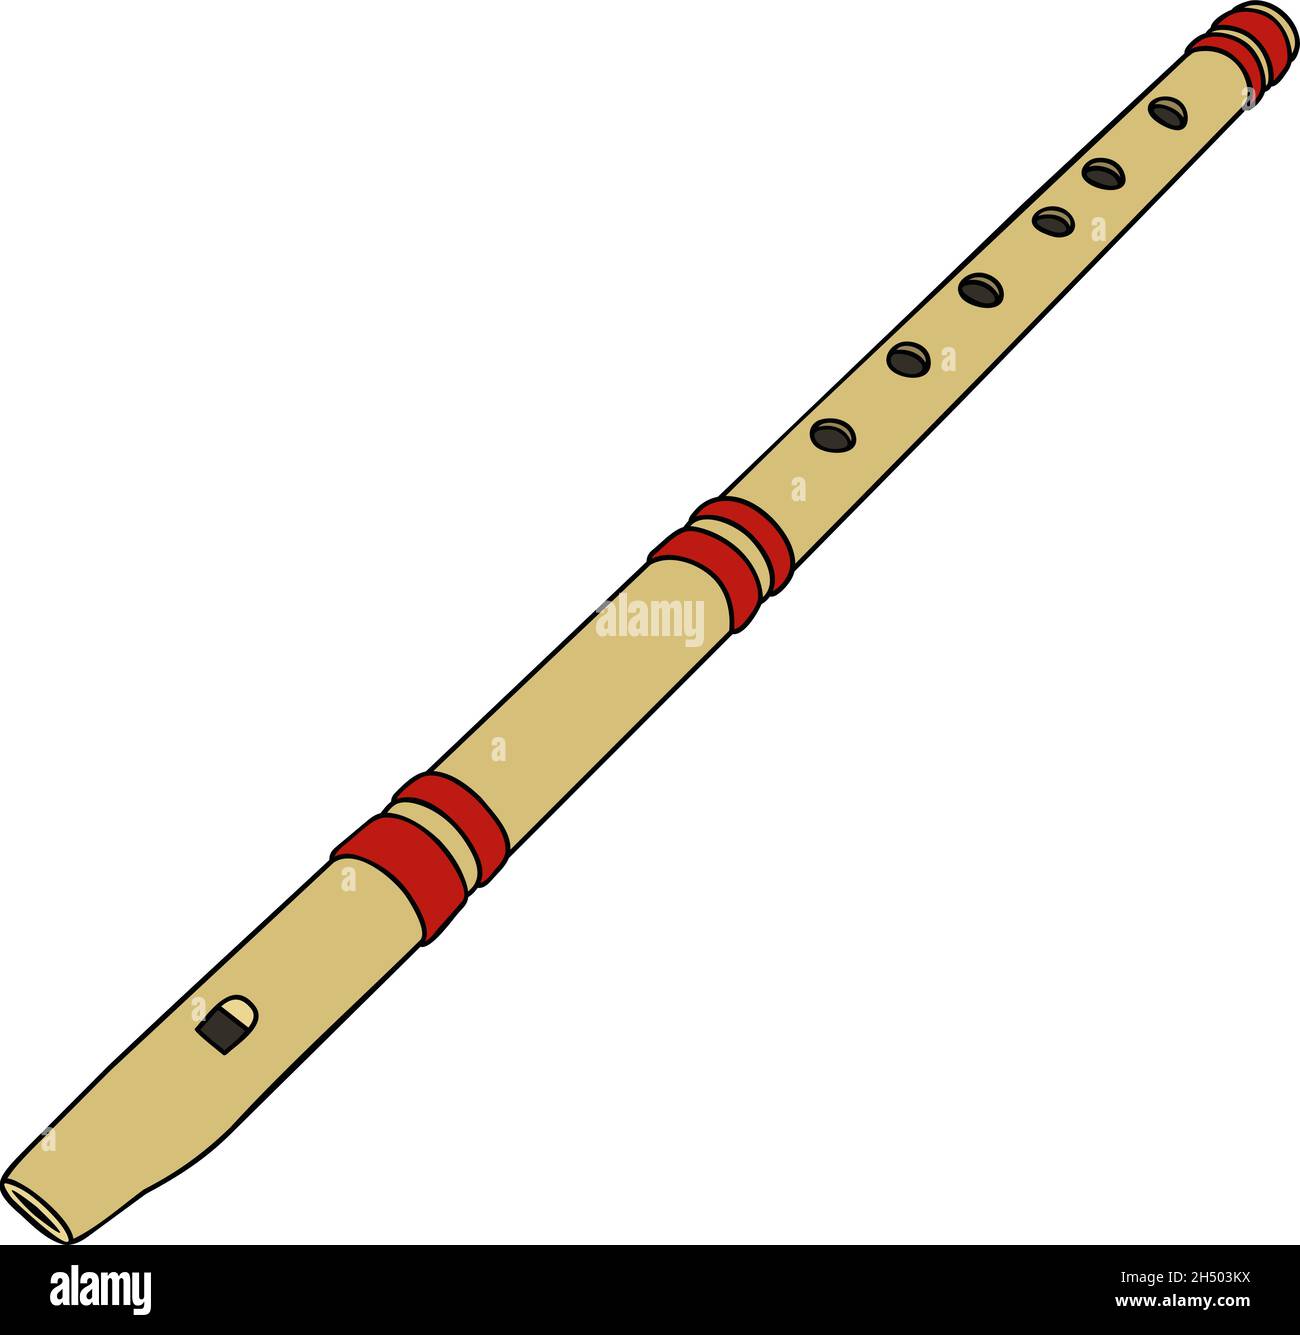 Learn How to Draw a Flute Musical Instruments Step by Step  Drawing  Tutorials